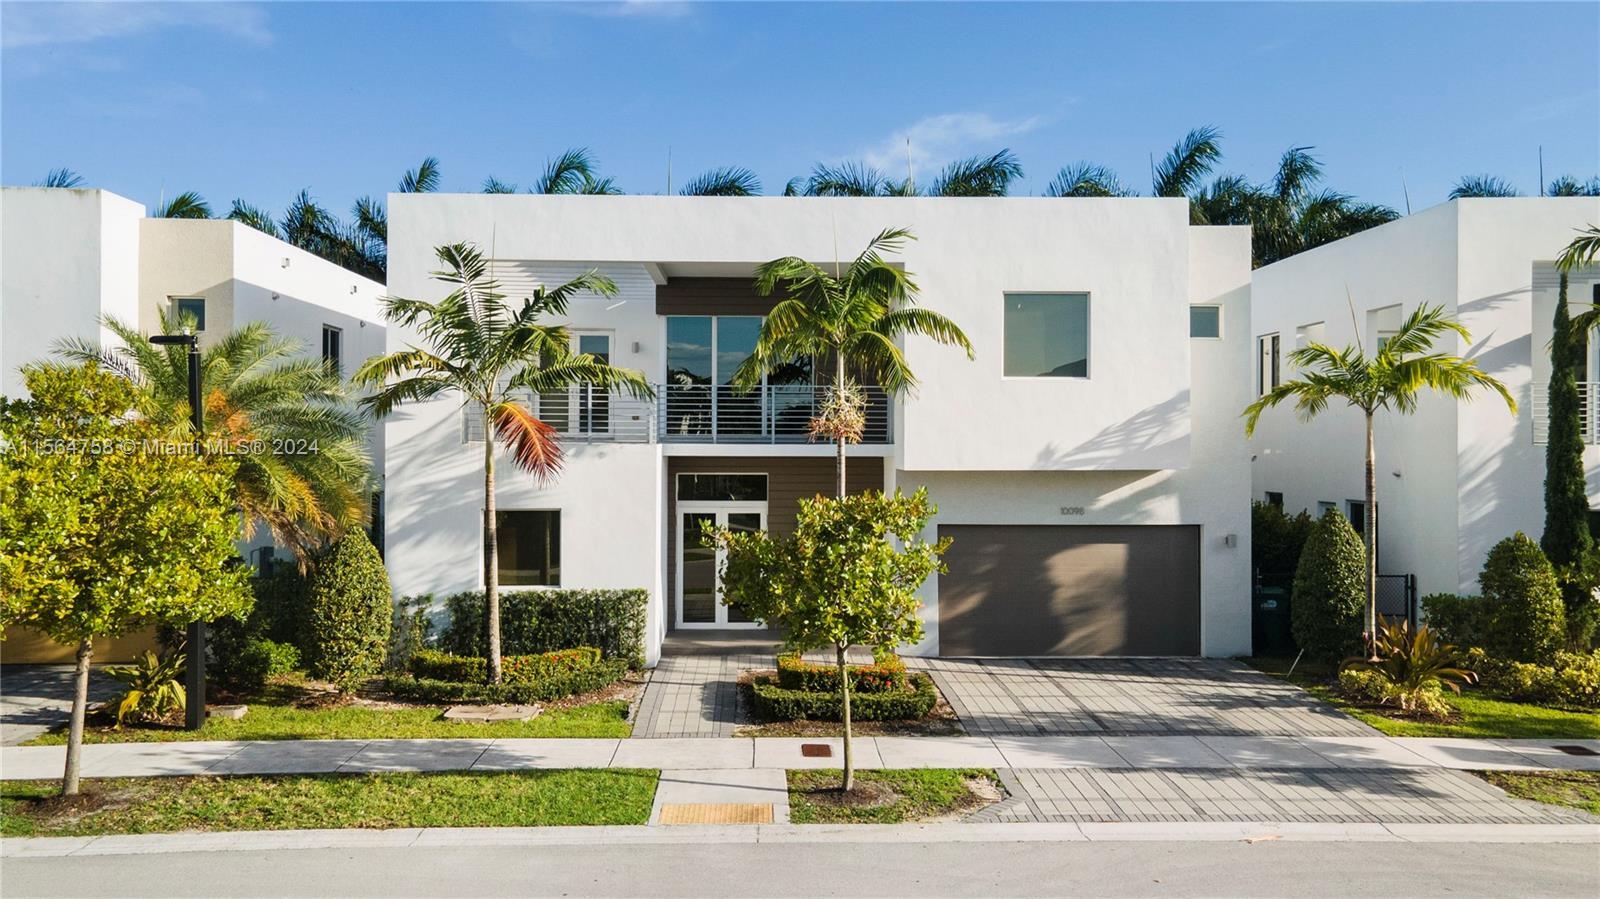 Photo of 10098 NW 74th Ter in Doral, FL